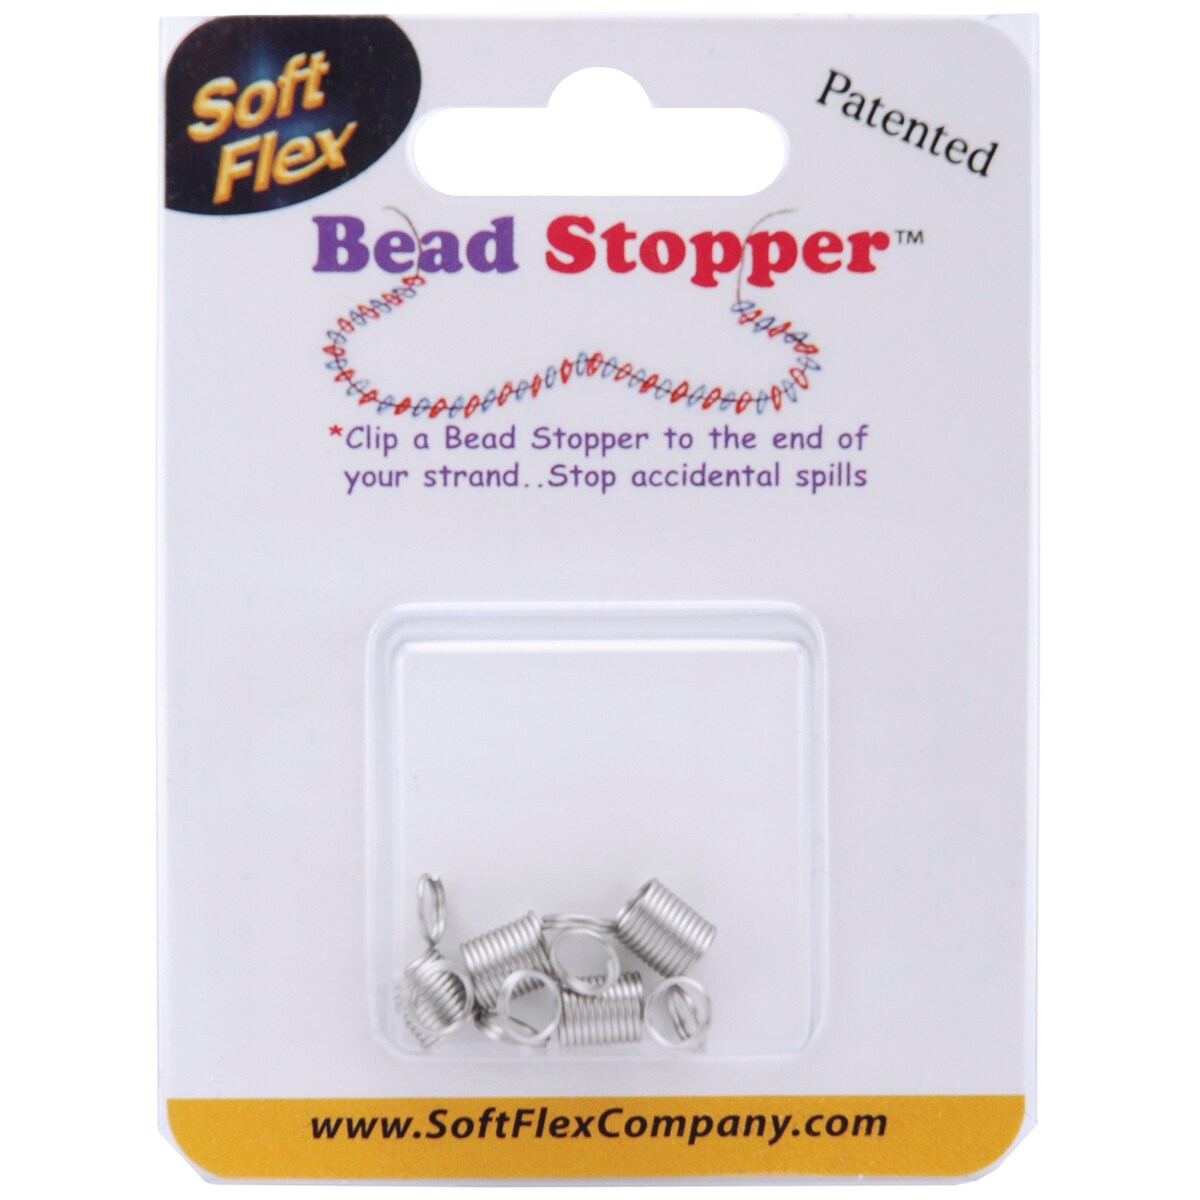 Bead Stoppers - 4 Pack